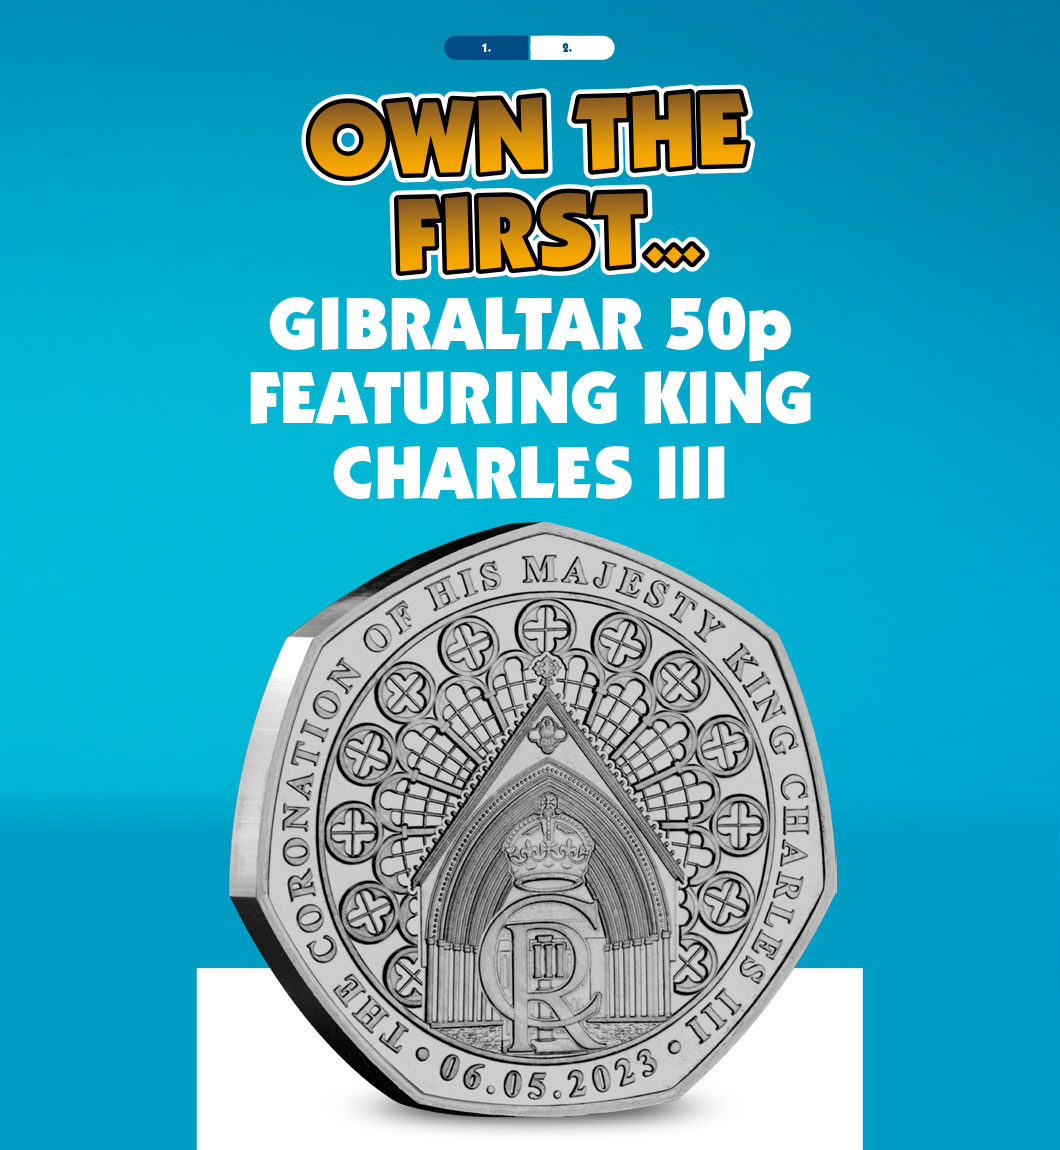 Own the first... Gibraltar 50p featuring King Charles III